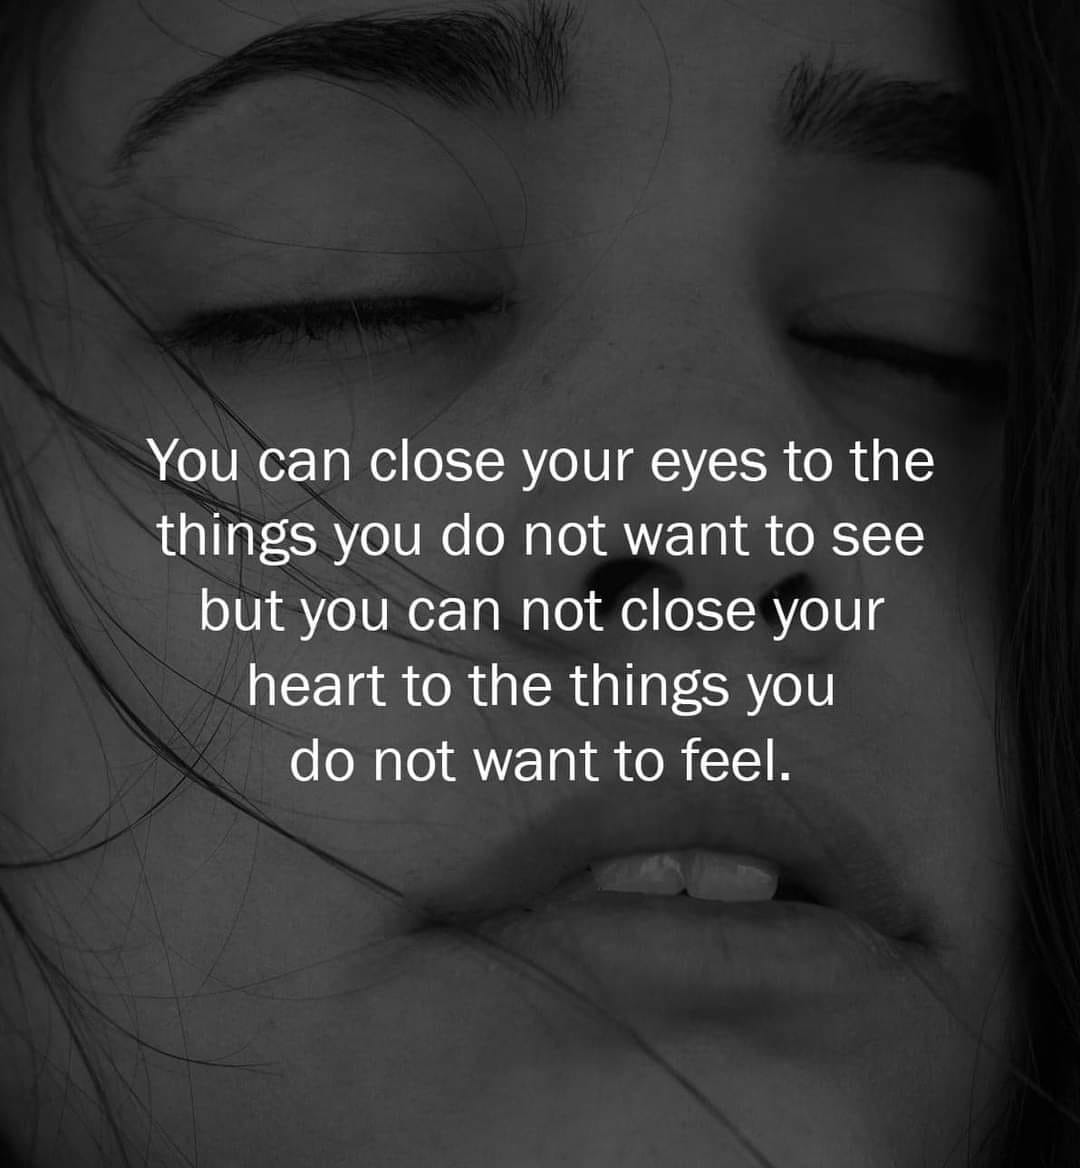 Unsaid feeling Quotes Whatsapp Dp images